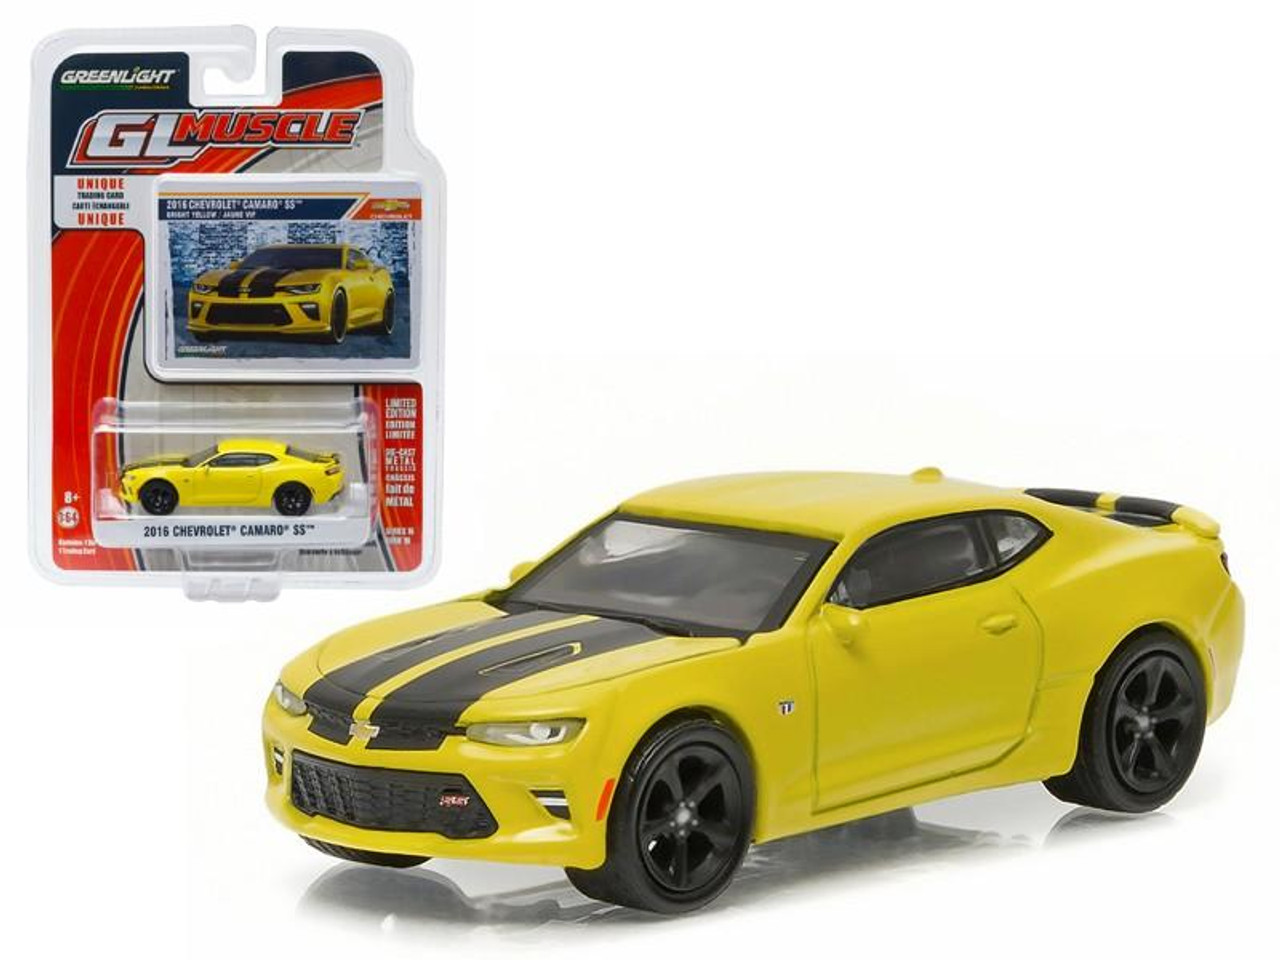 2016 Chevrolet Camaro SS Convertible Blue Velvet General Motors Collection Series 1 1/64 by Greenlight 27870 F